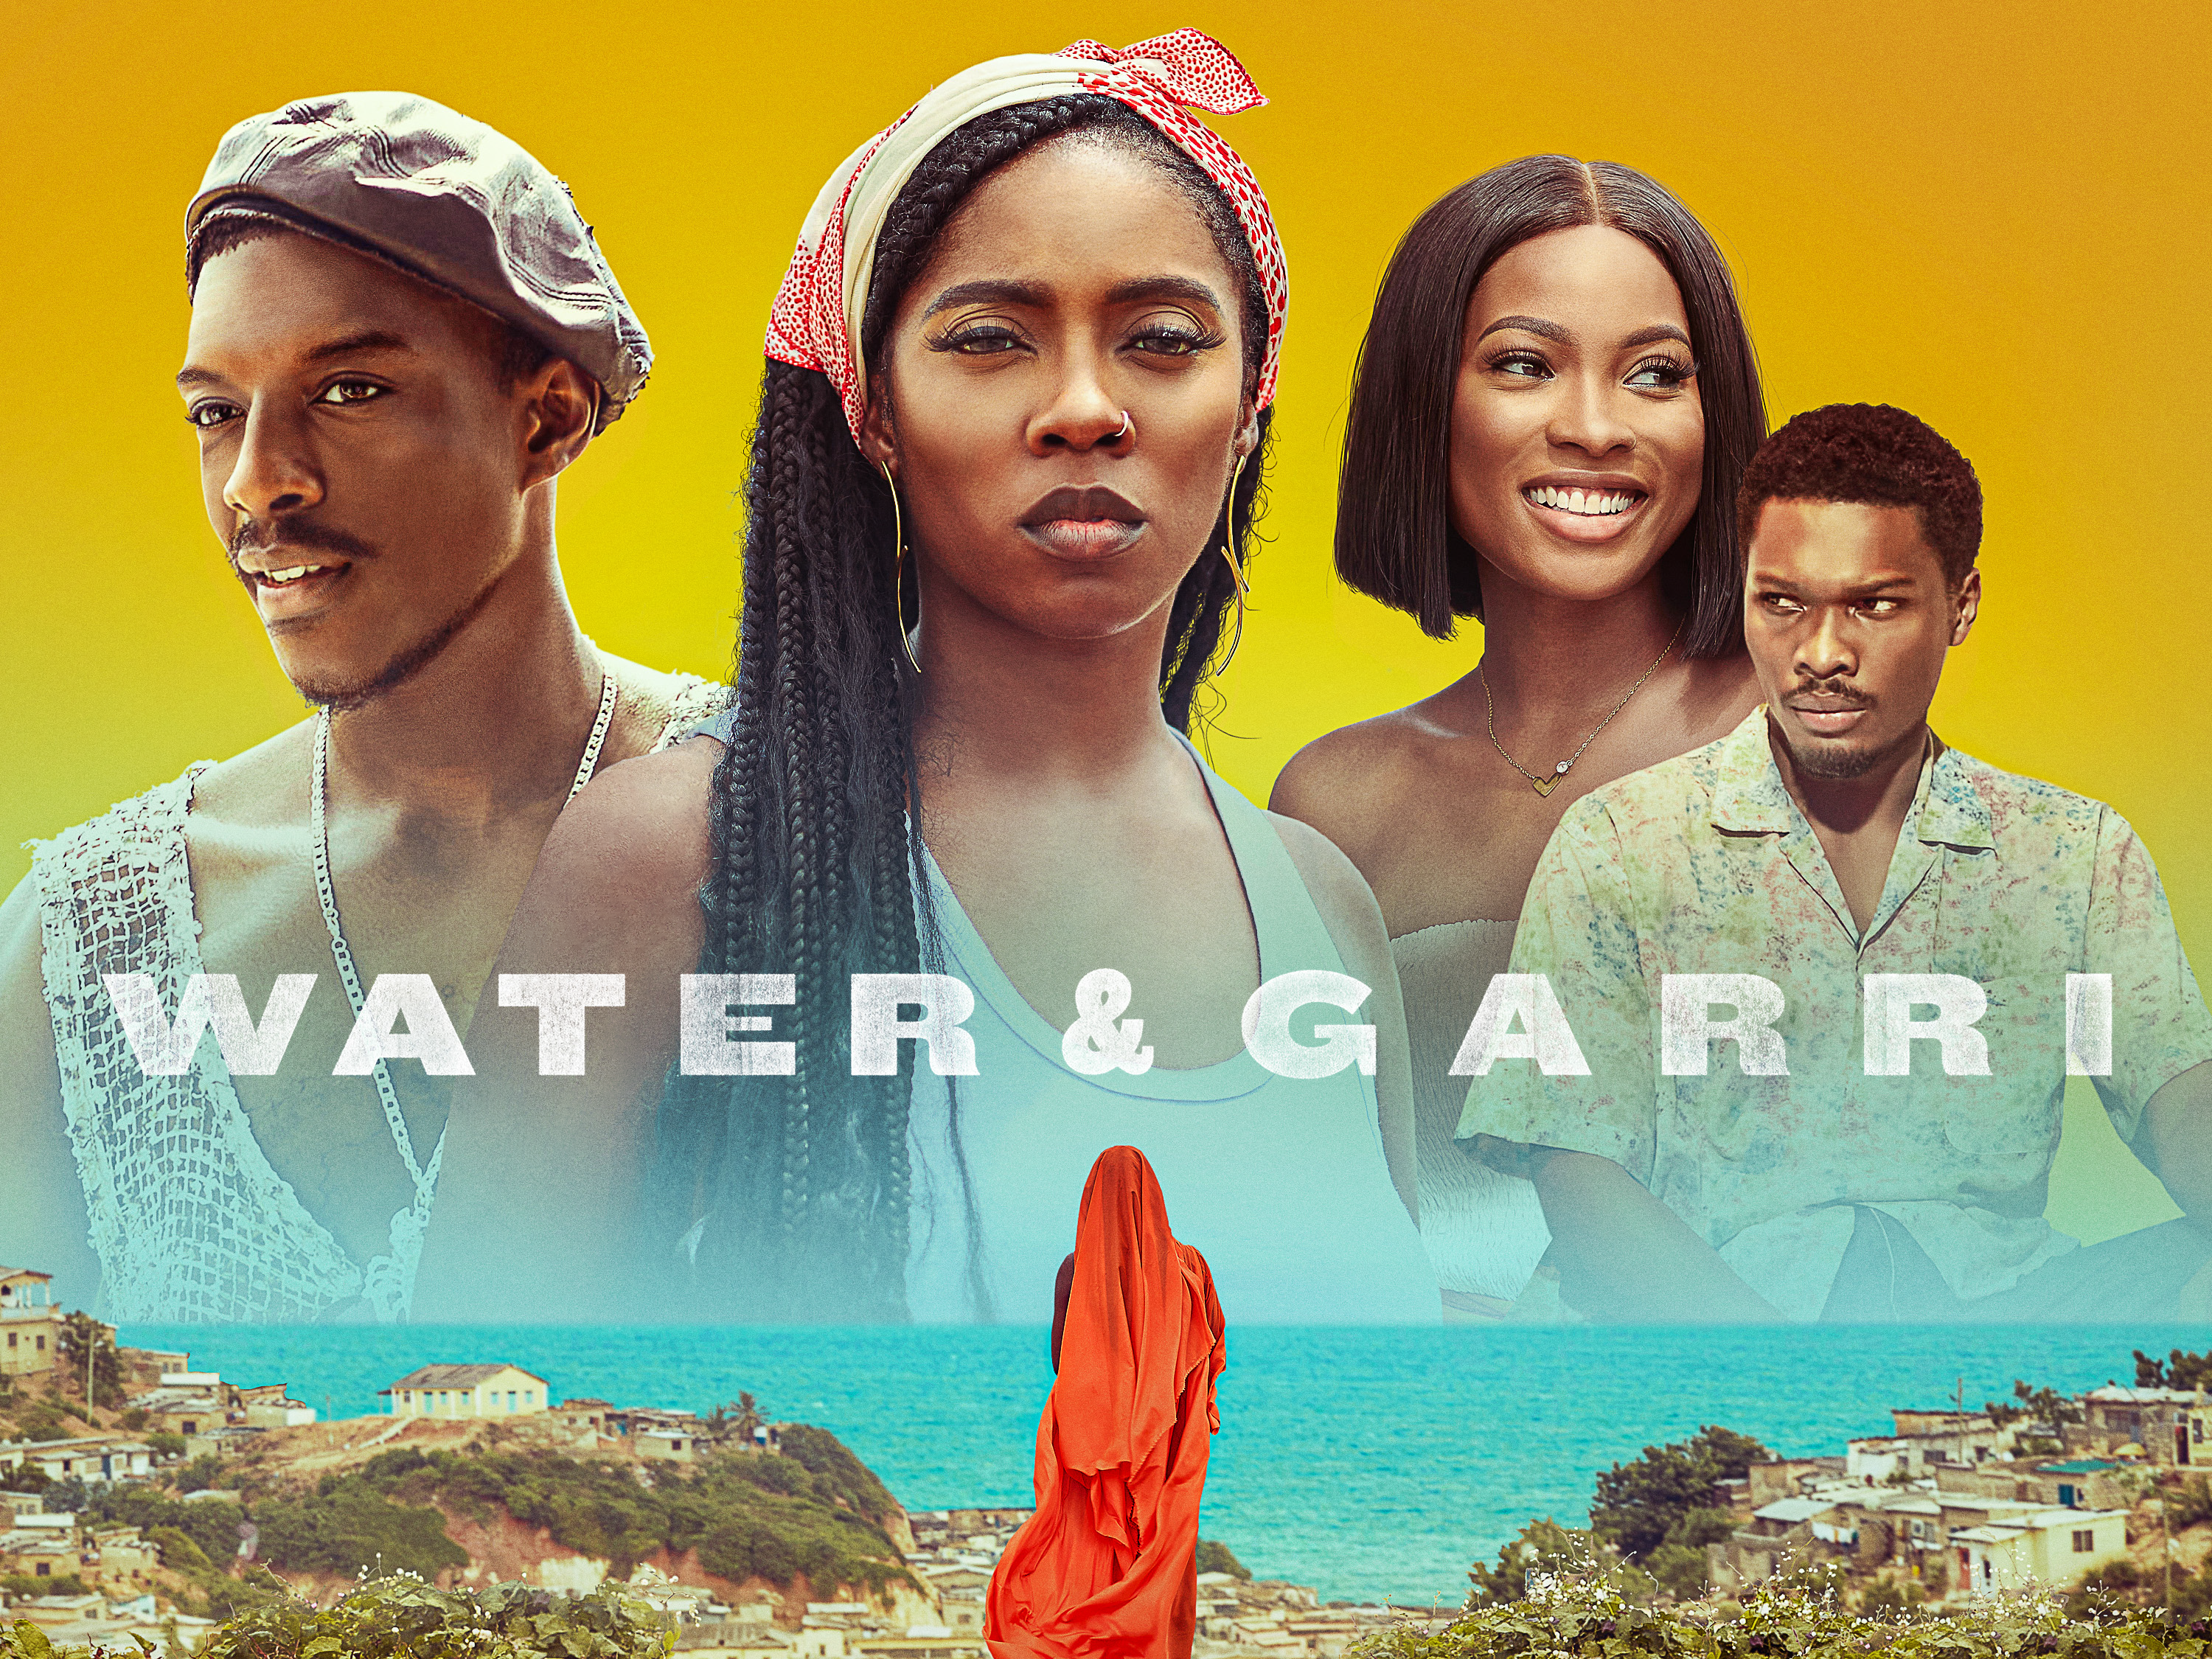 Tiwa Savage Is In Touch With Her Roots In The New Amazon Prime Film, ‘Water & Garri’